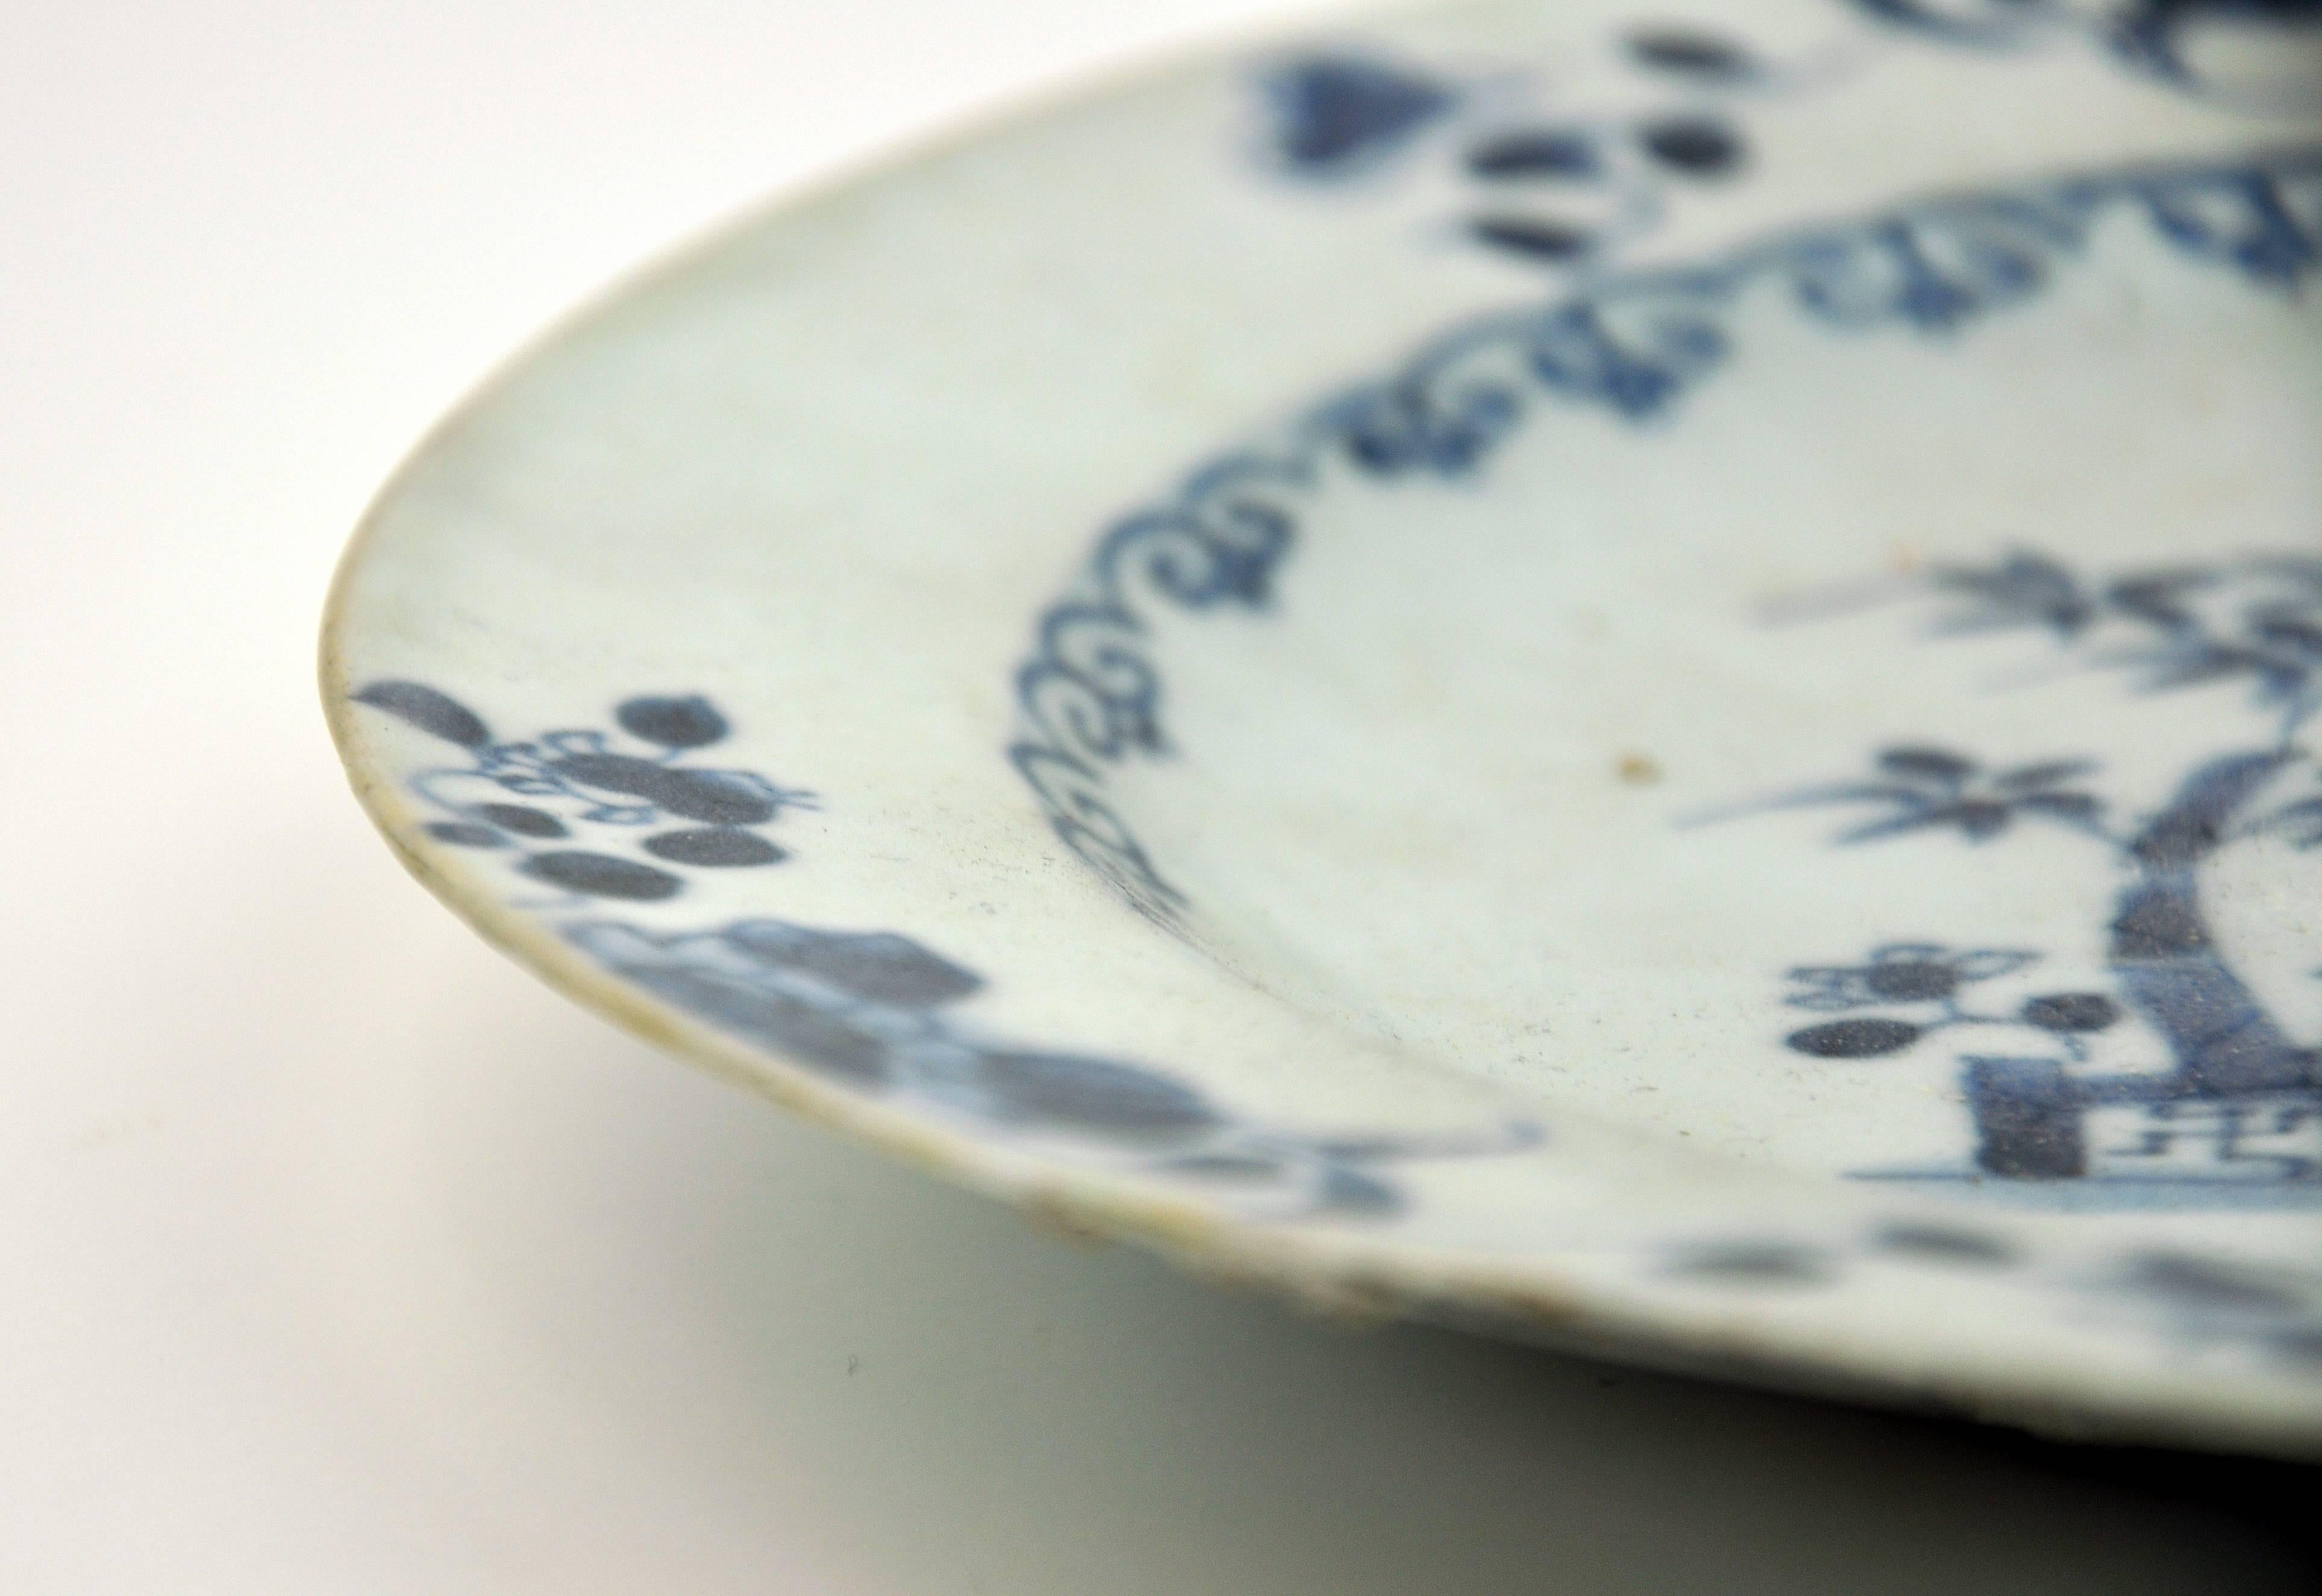 A mid-18th century Chinese Qing dynasty porcelain plate, recovered from the shipwreck of the Dutch East India Company ship 